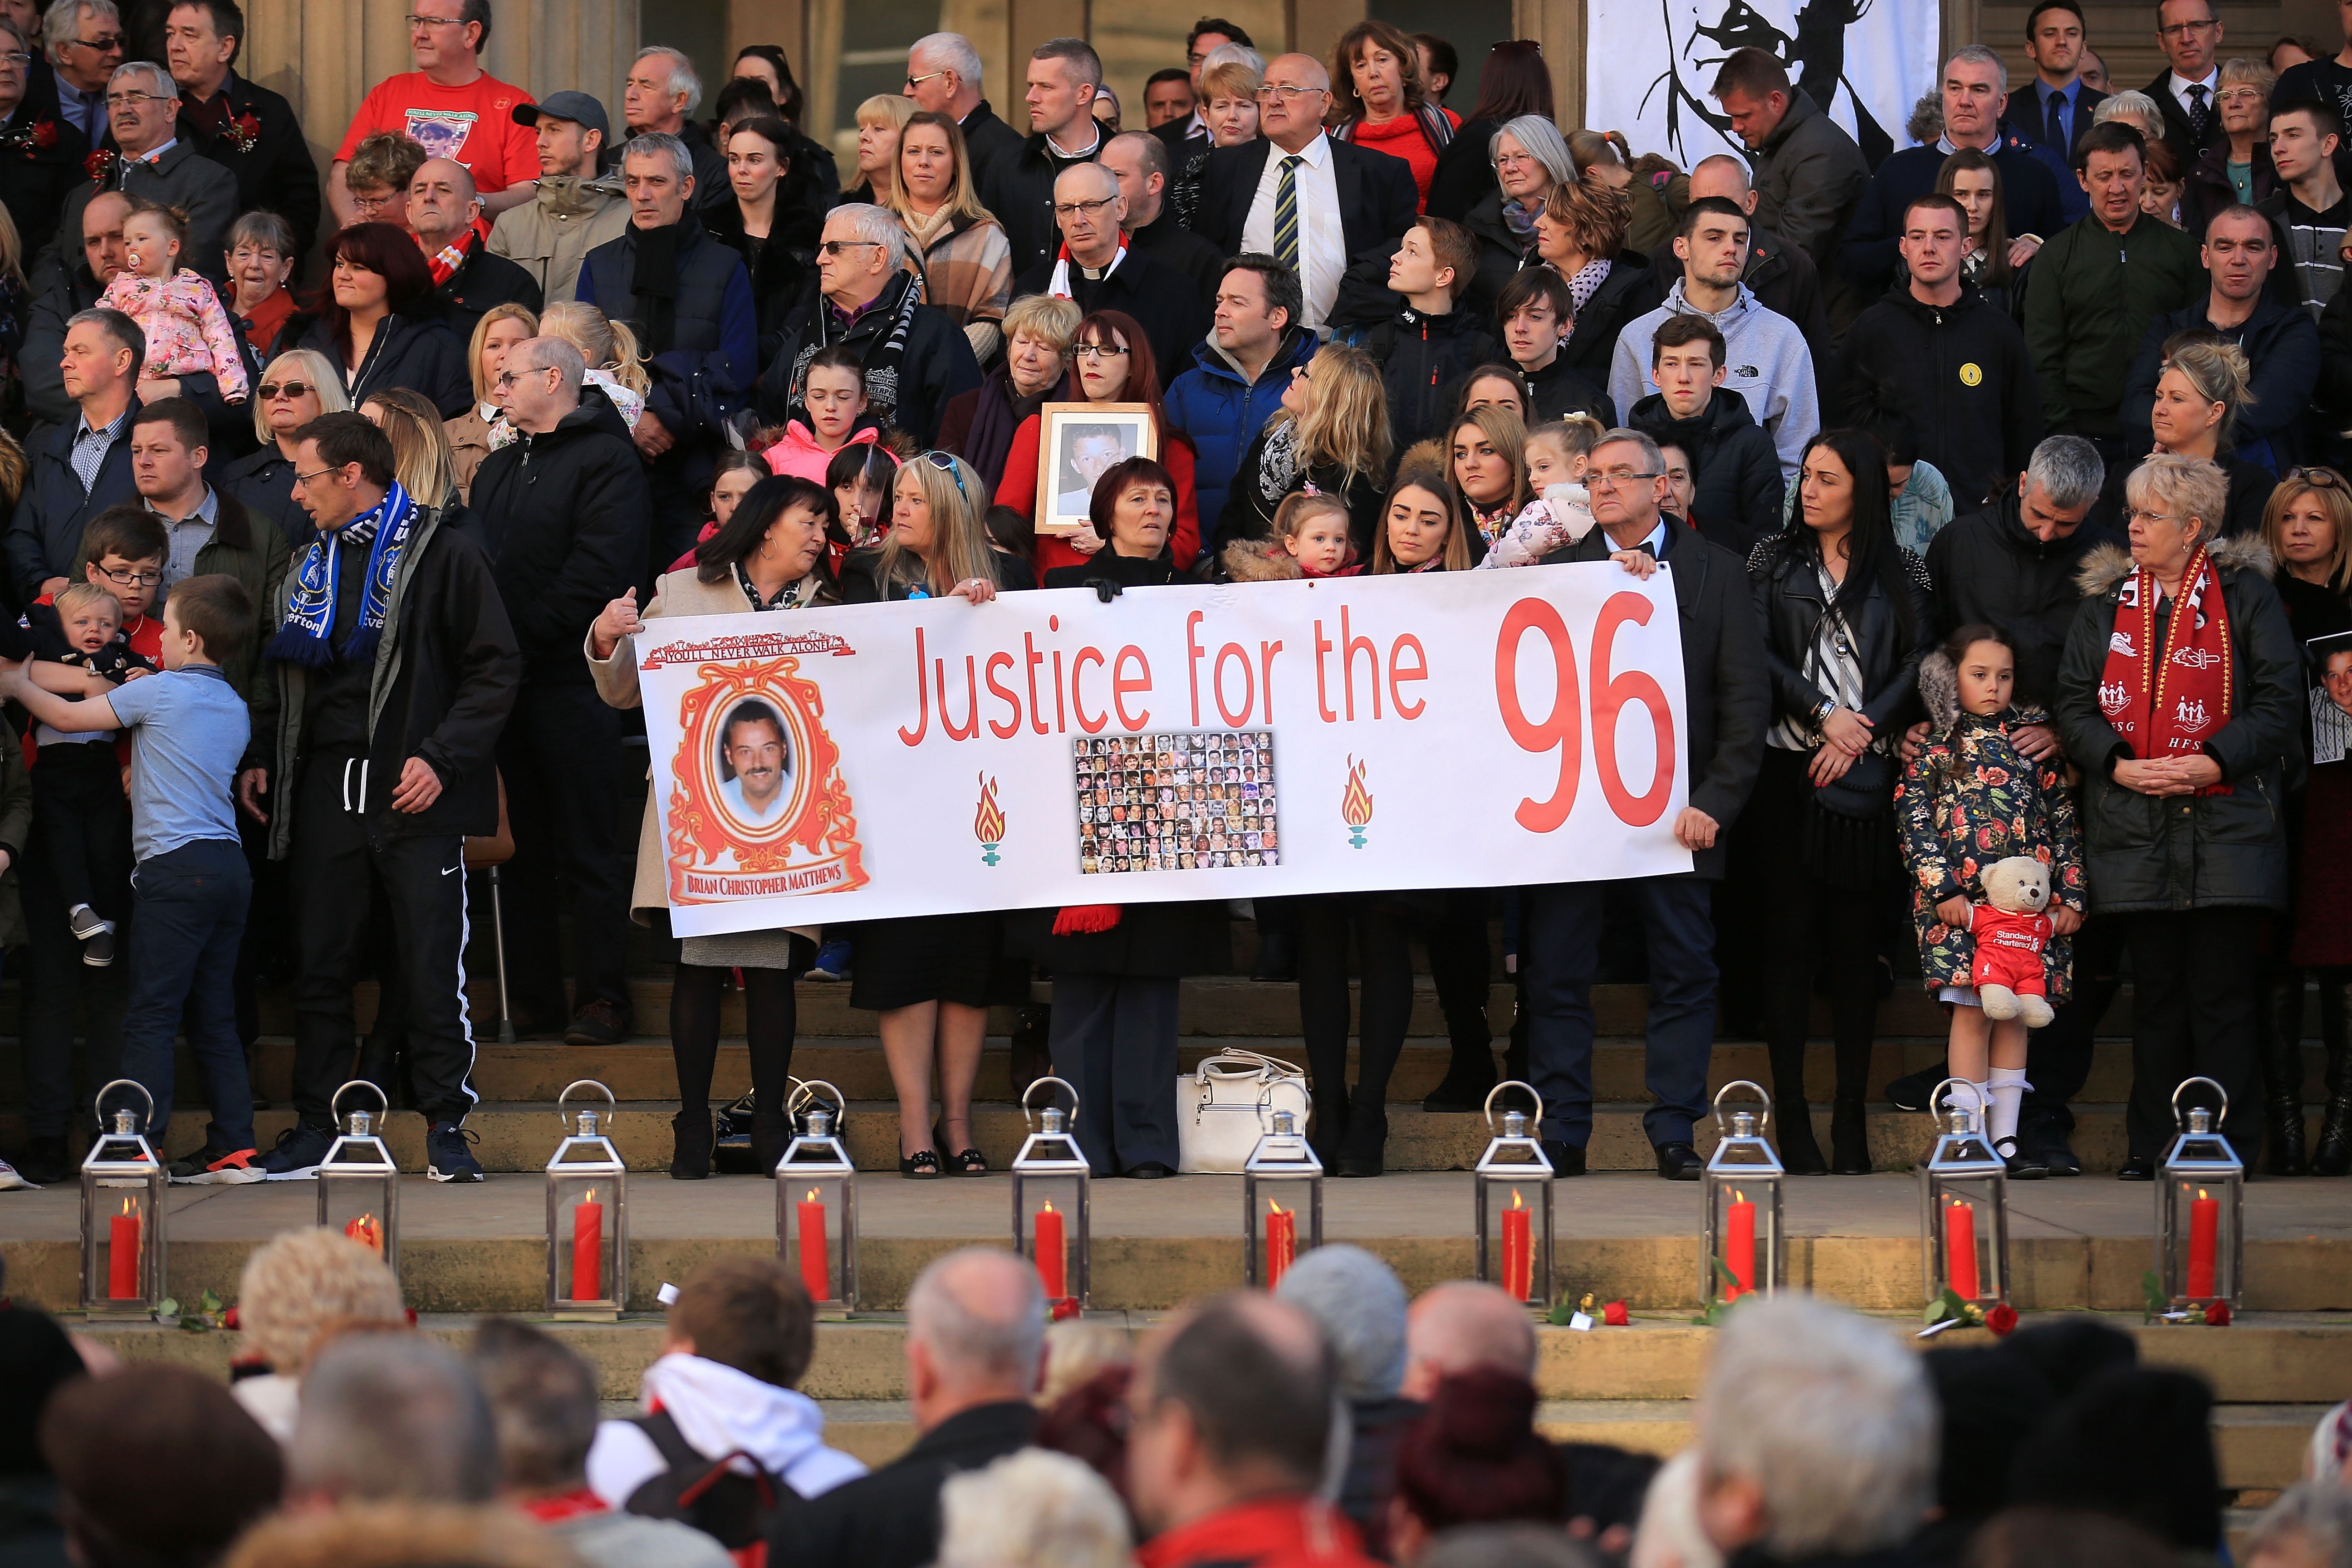 Chanting that mocks the Hillsborough disaster has been an issue in football